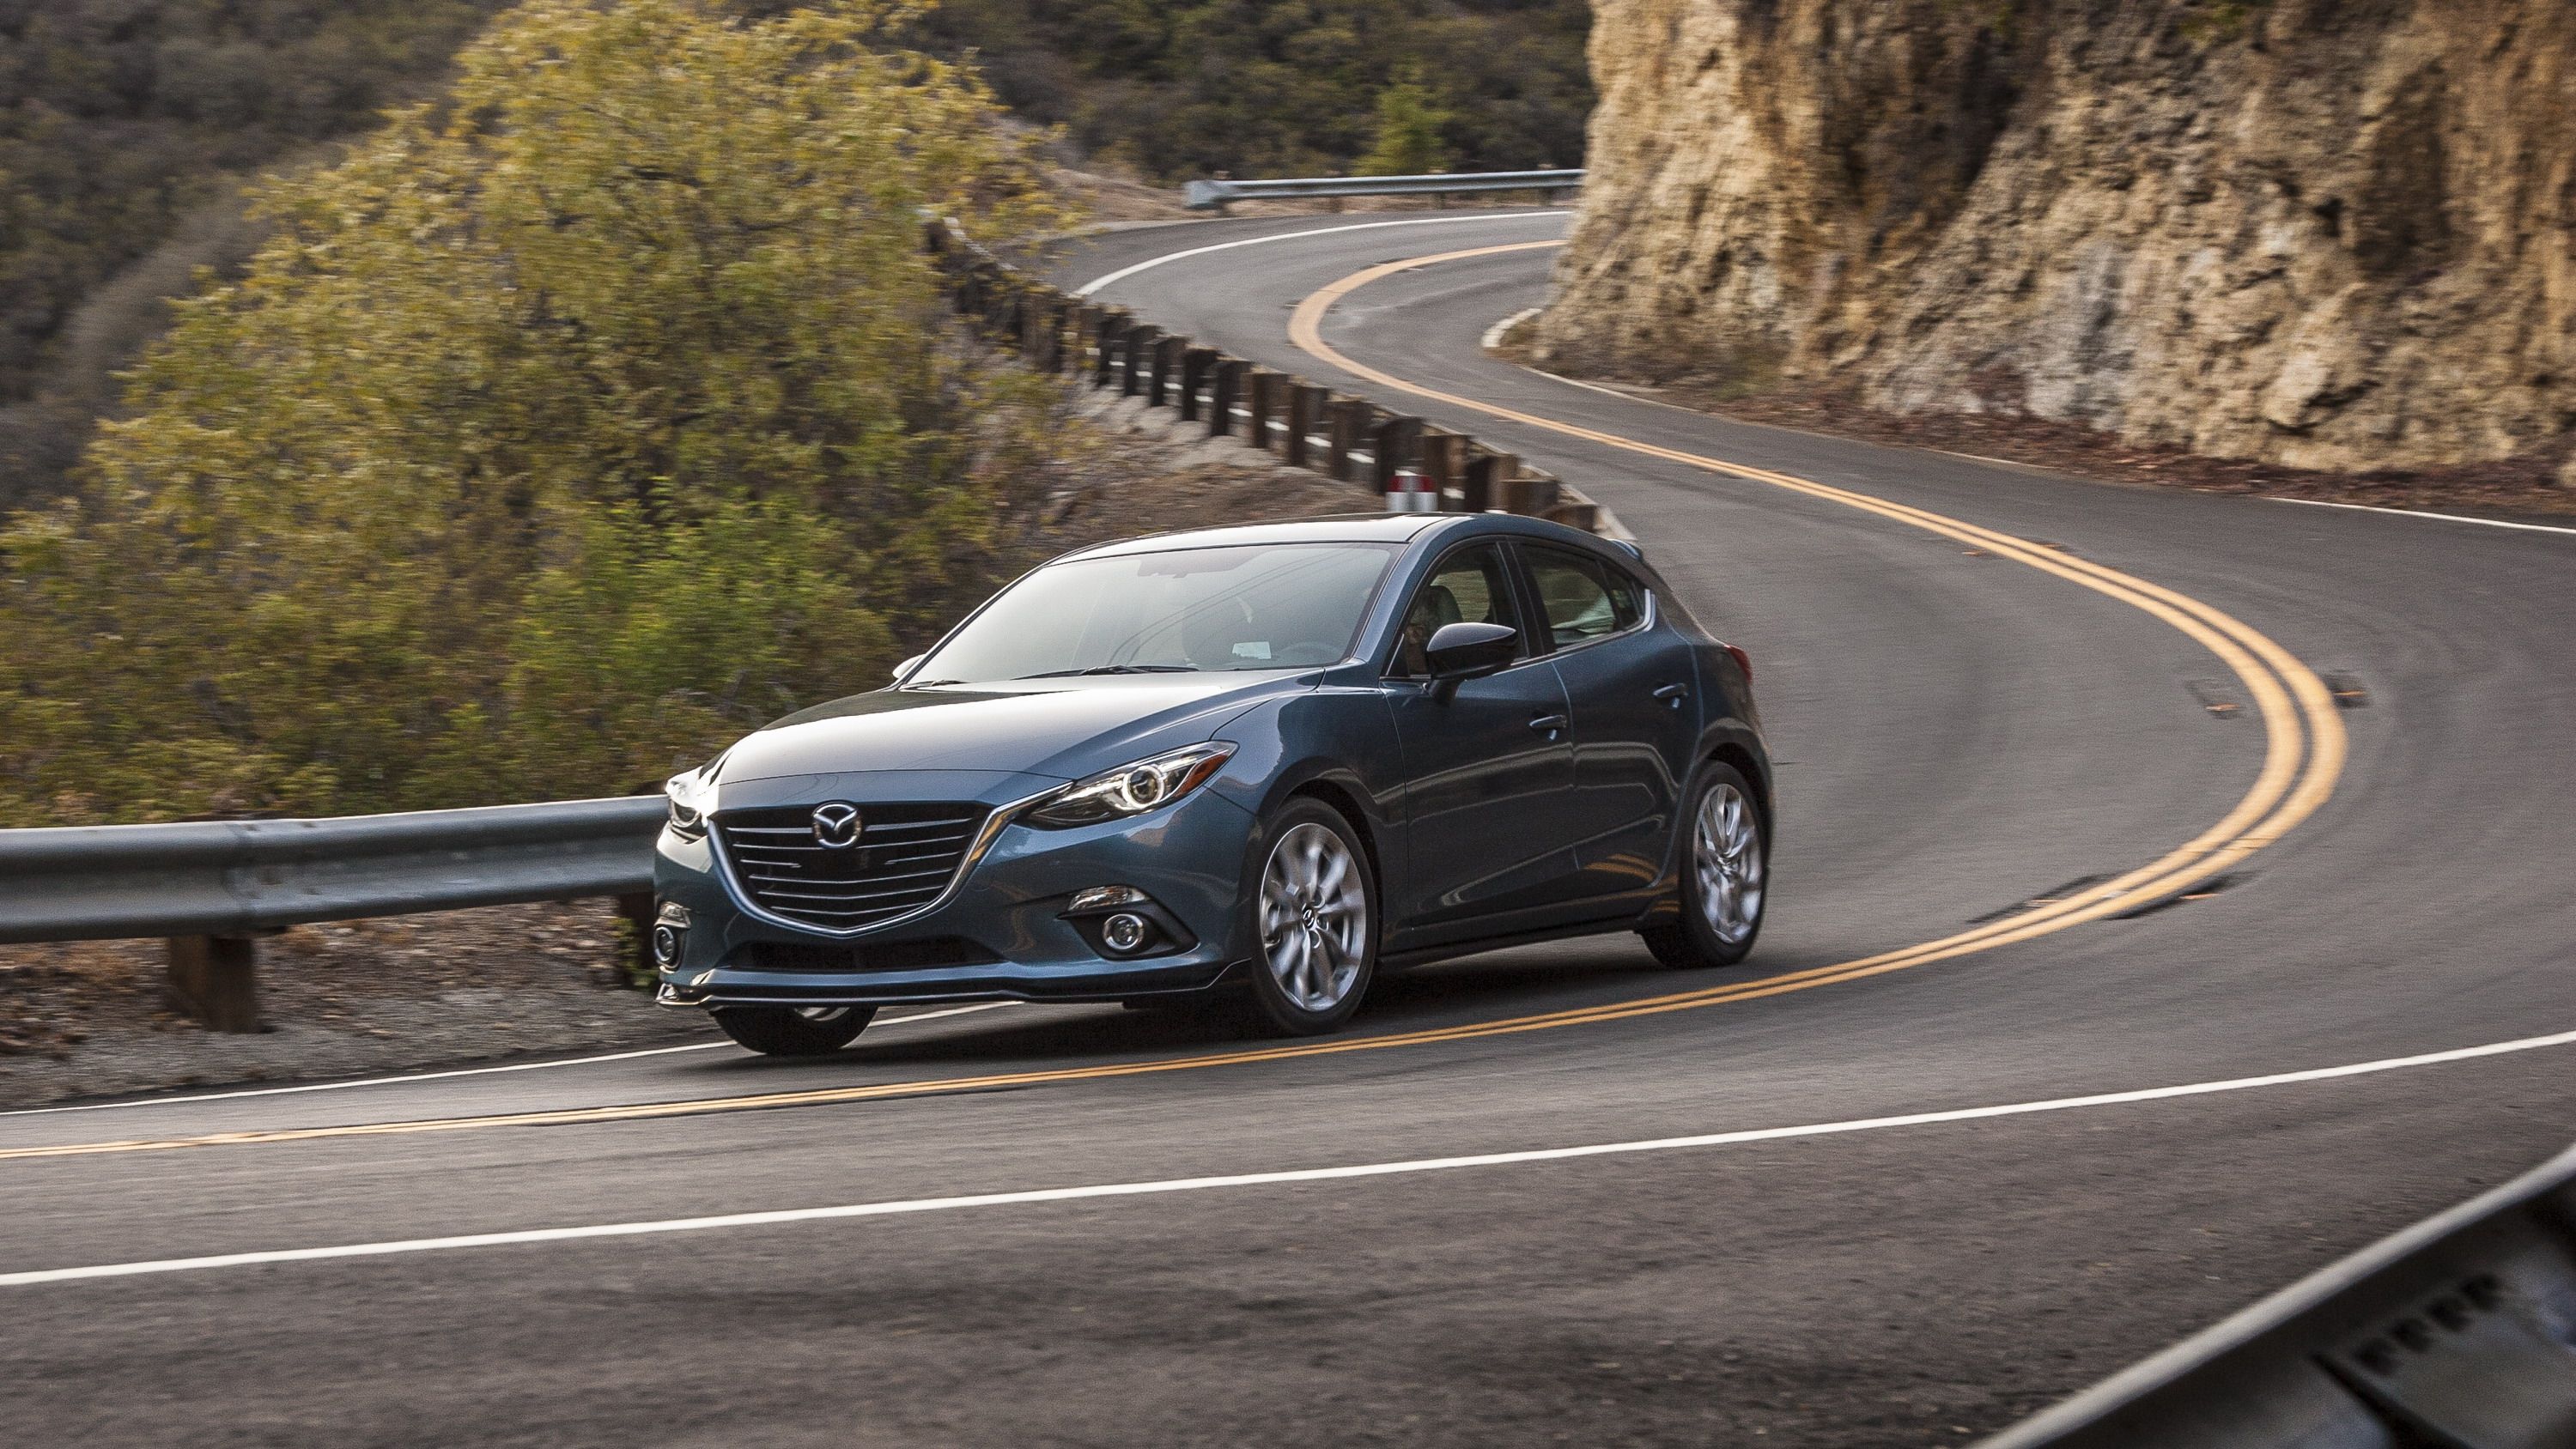 Wallpaper Of The Day: 2018 Mazda 3